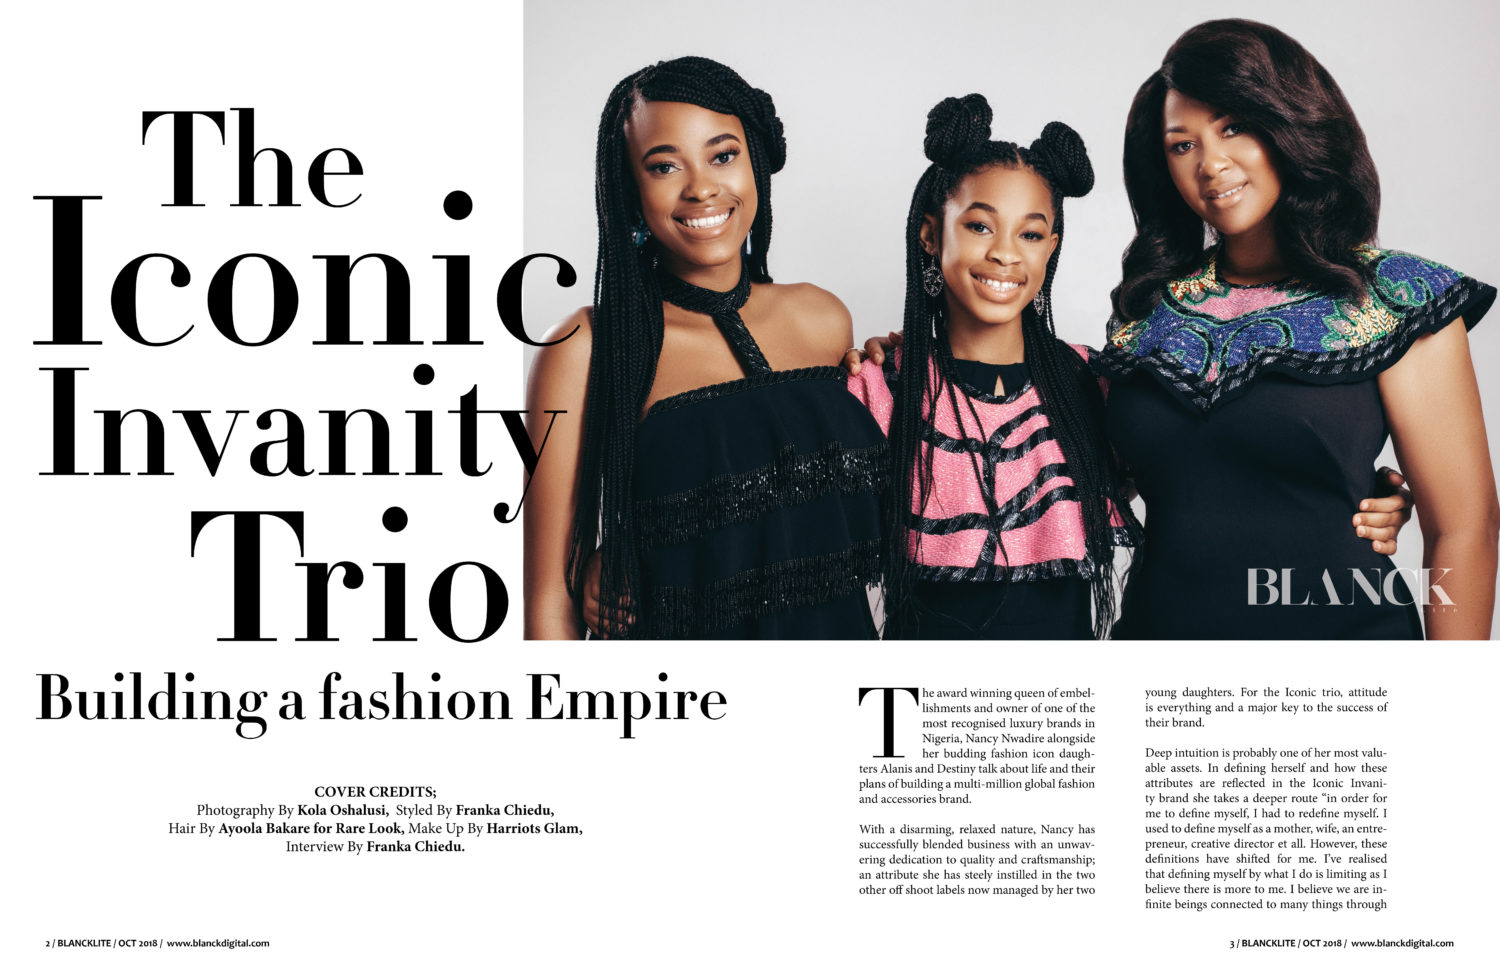 Nancy, Destiny & Alanis Nwadire Are The Latest Cover Stars For Blanck Magazine